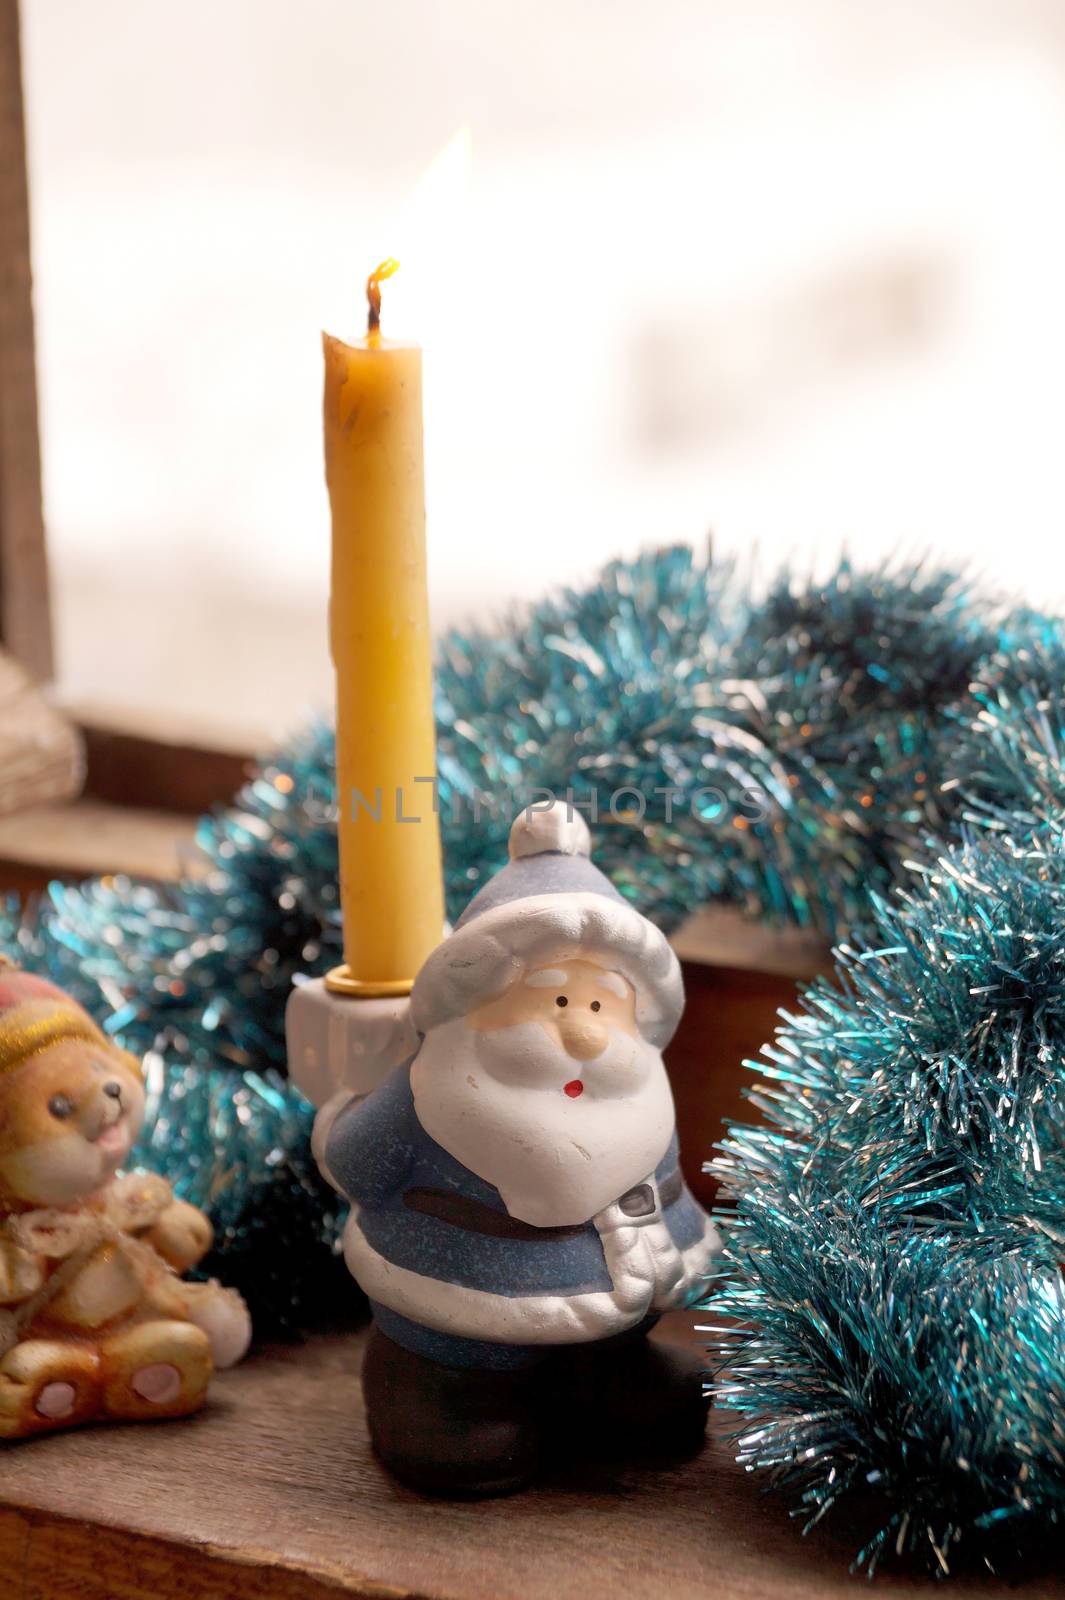 Support under a candle in the form of Father Frost by Vadimdem